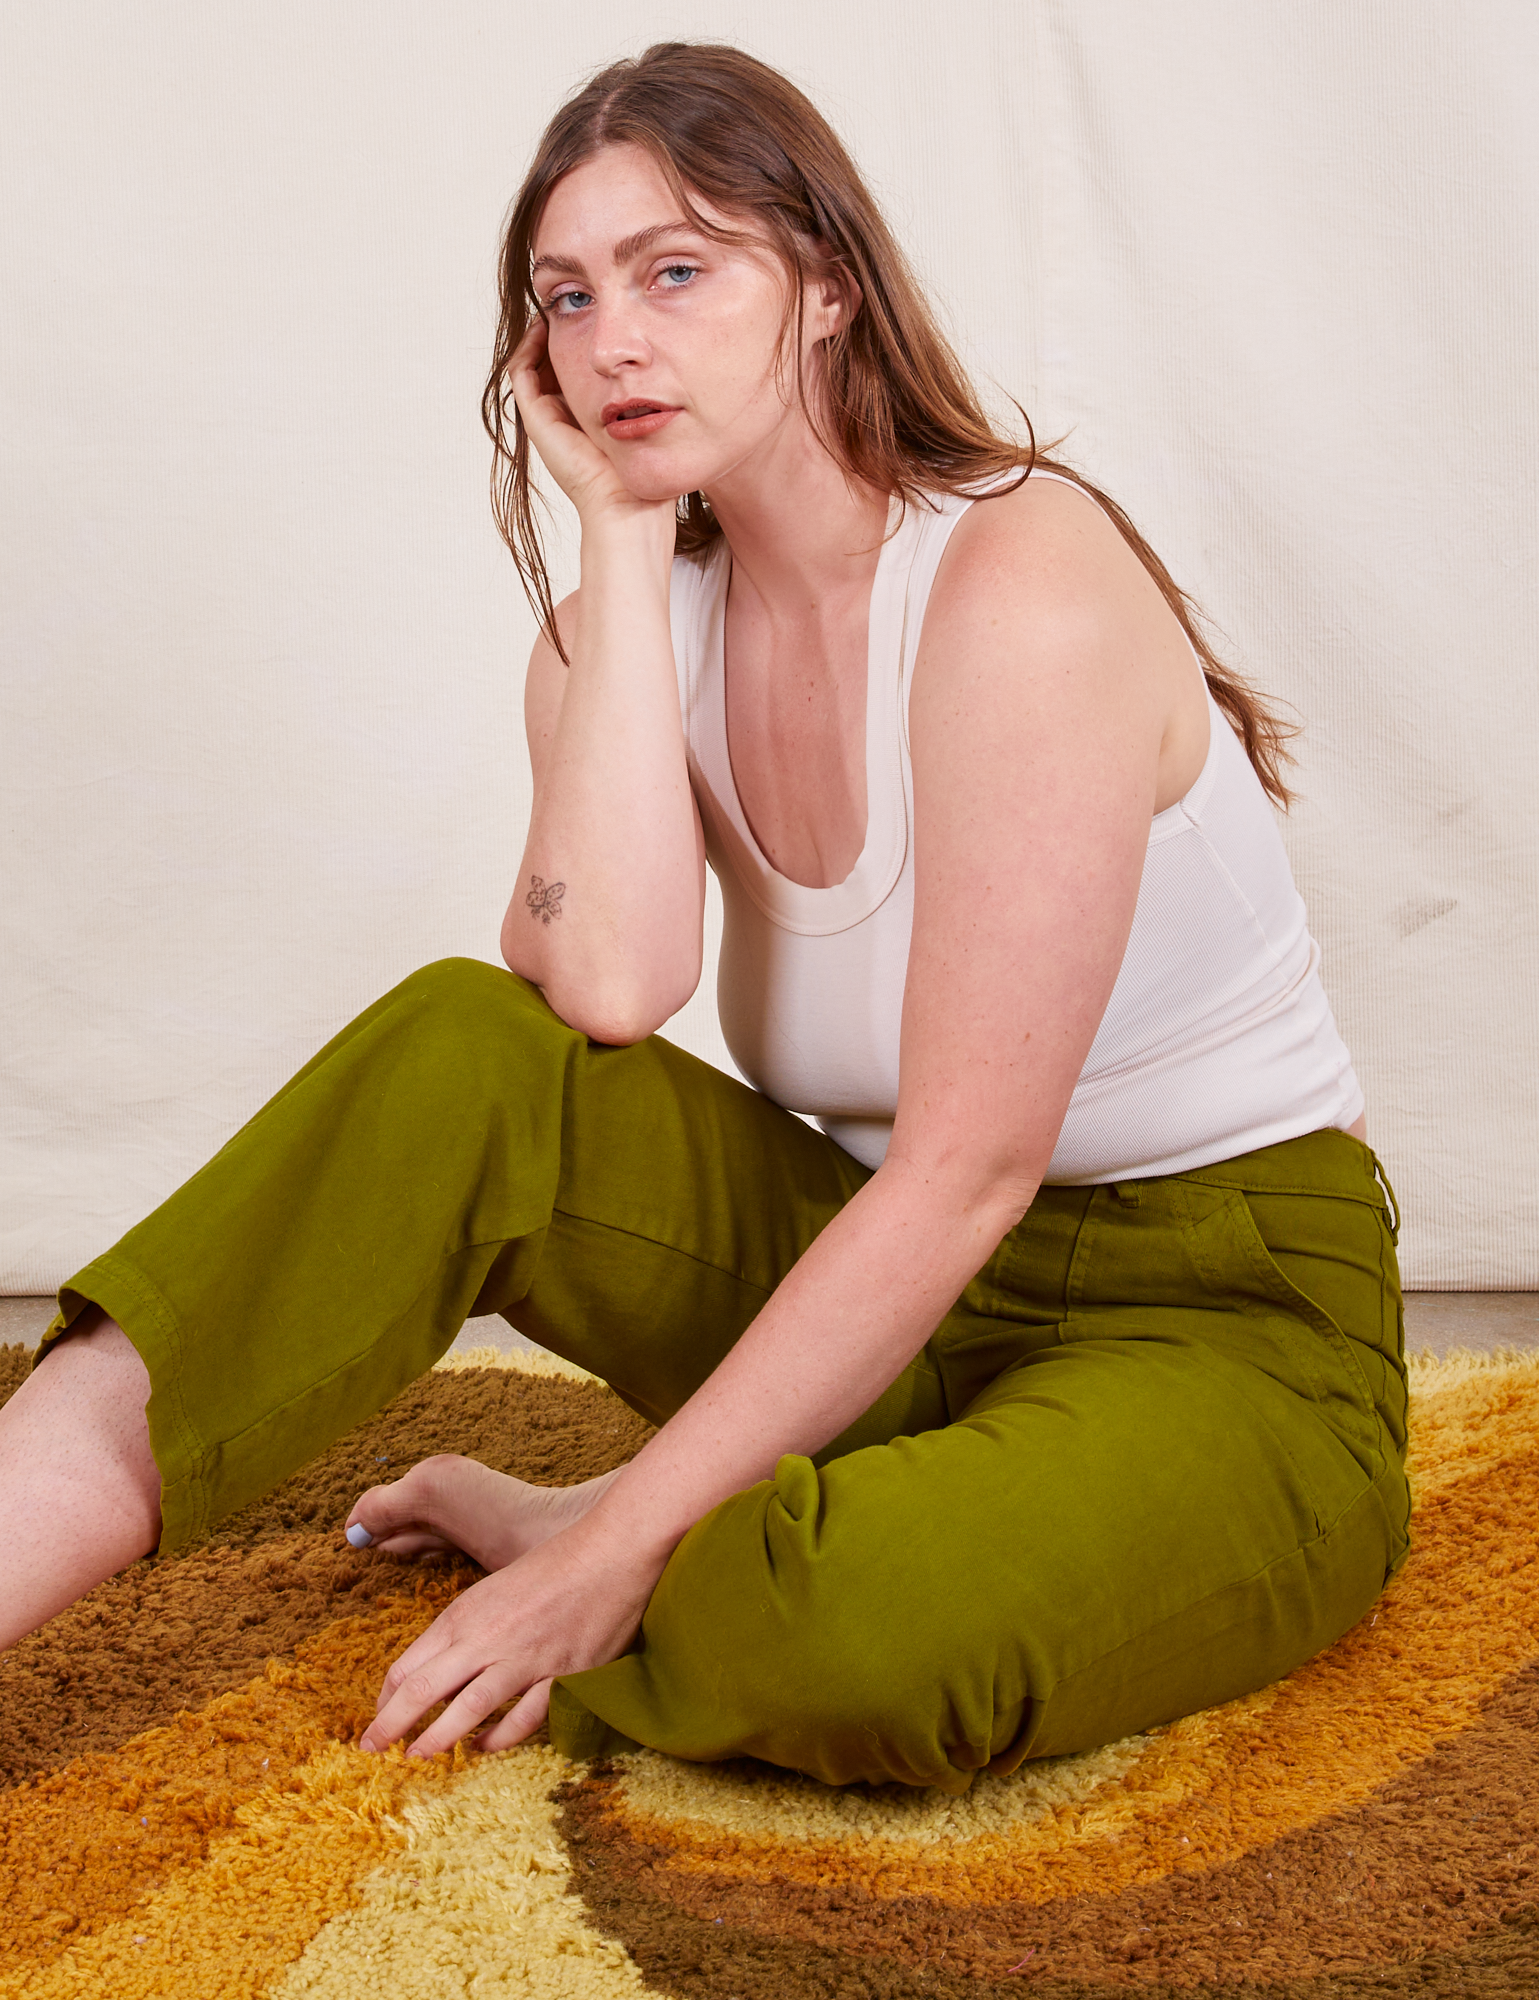 Allison is wearing Work Pants in Olive Green and vintage off-white Tank Top.